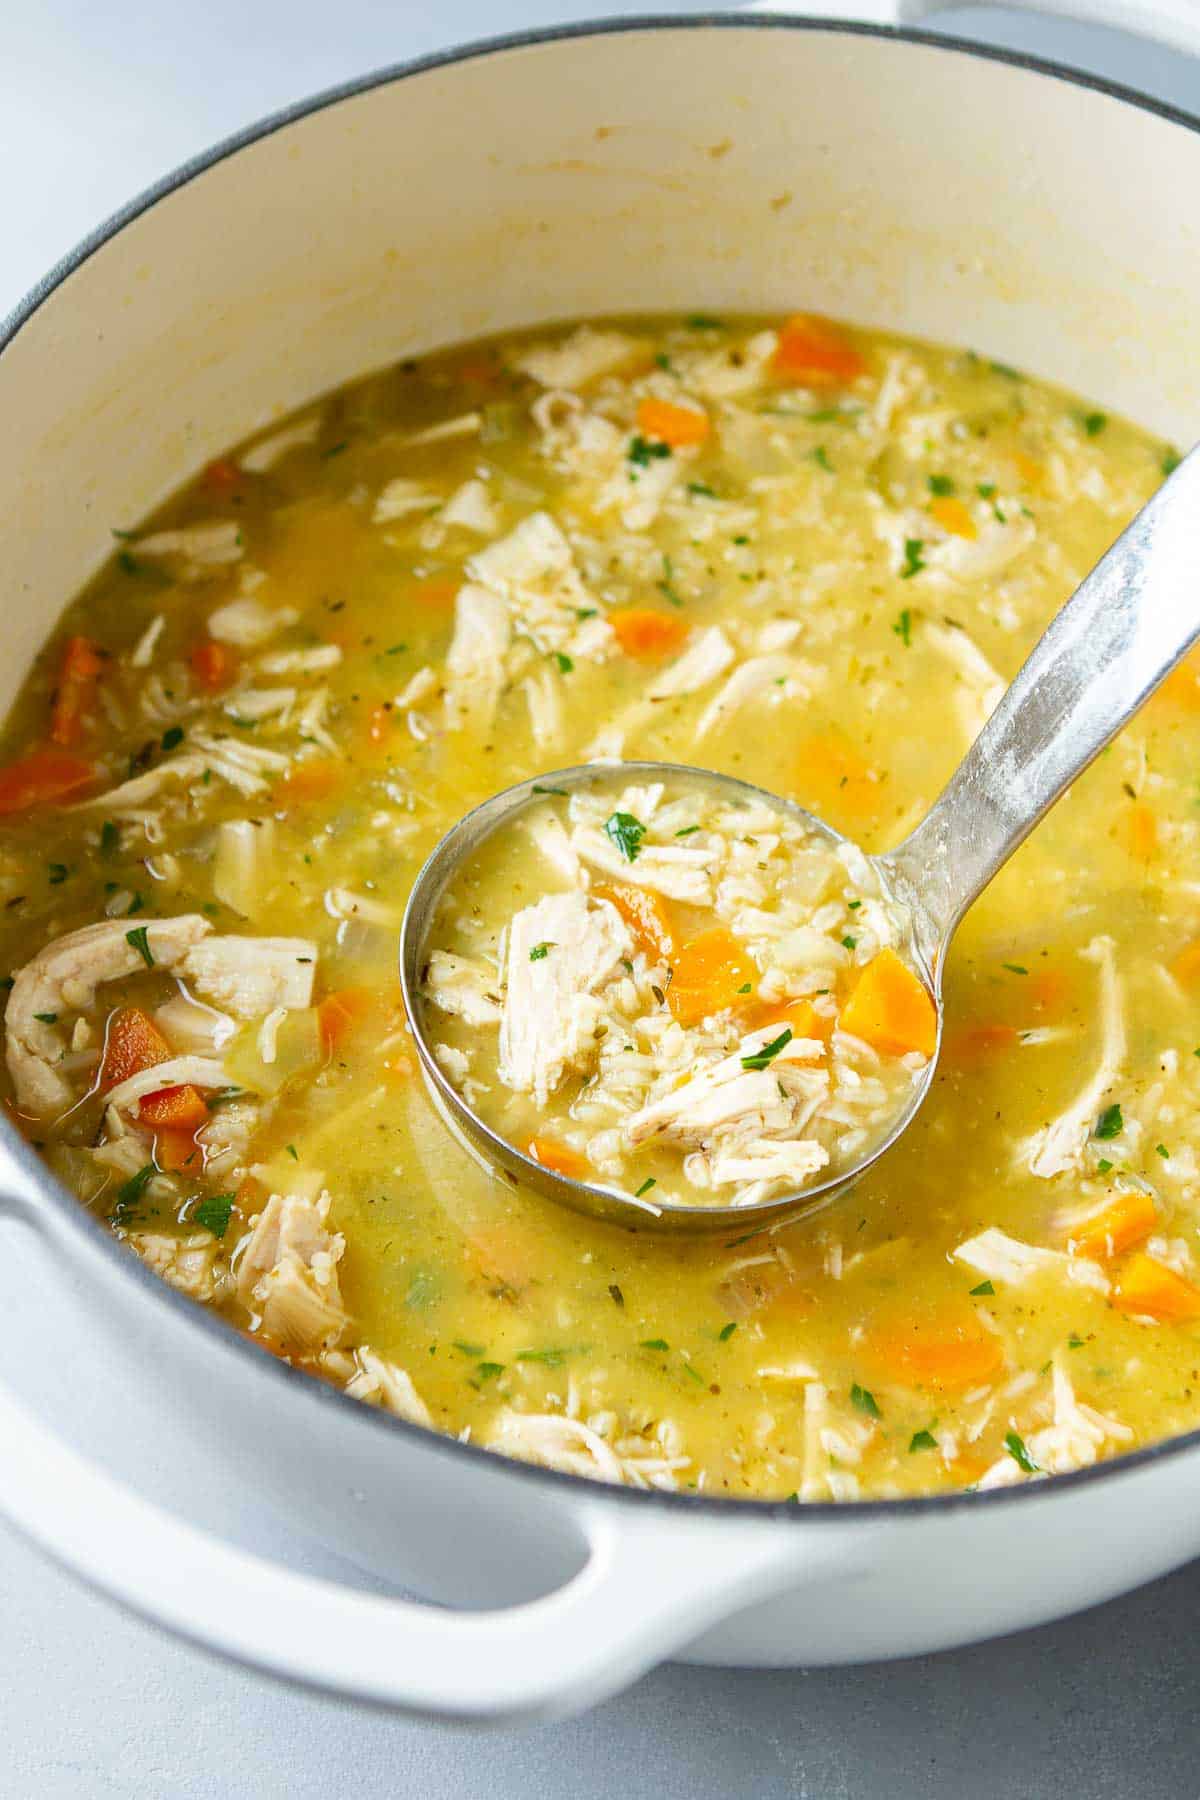 Turkey rice soup is a fantastic way to use up leftover turkey after the holidays. Healthy, flavorful and easy to make! | Thanksgiving | Leftovers | Recipes soup | Recipes leftover